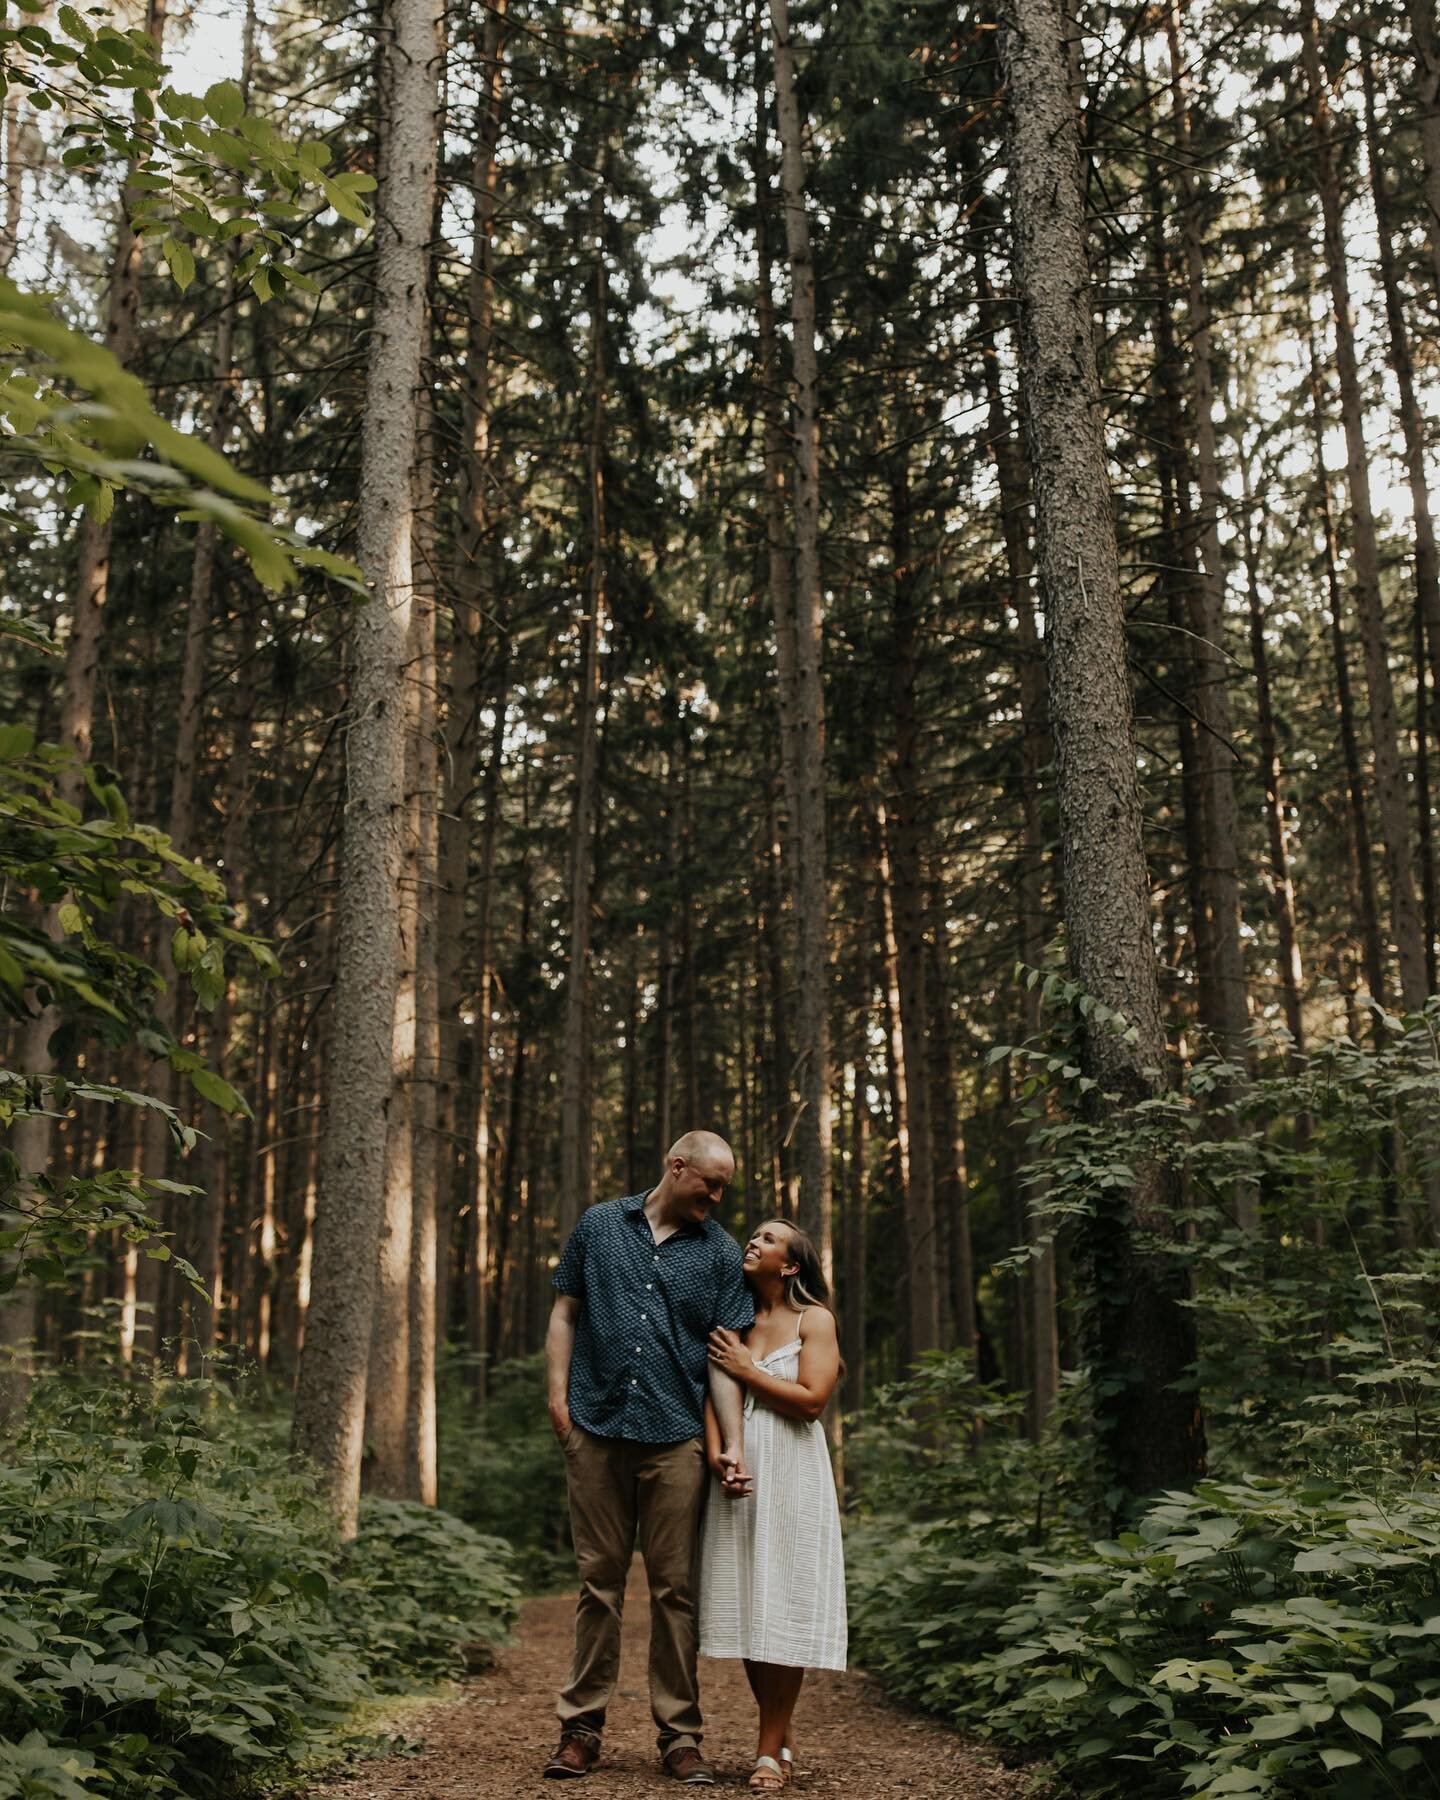 let's get these two forest babes married today. 🌲🌲